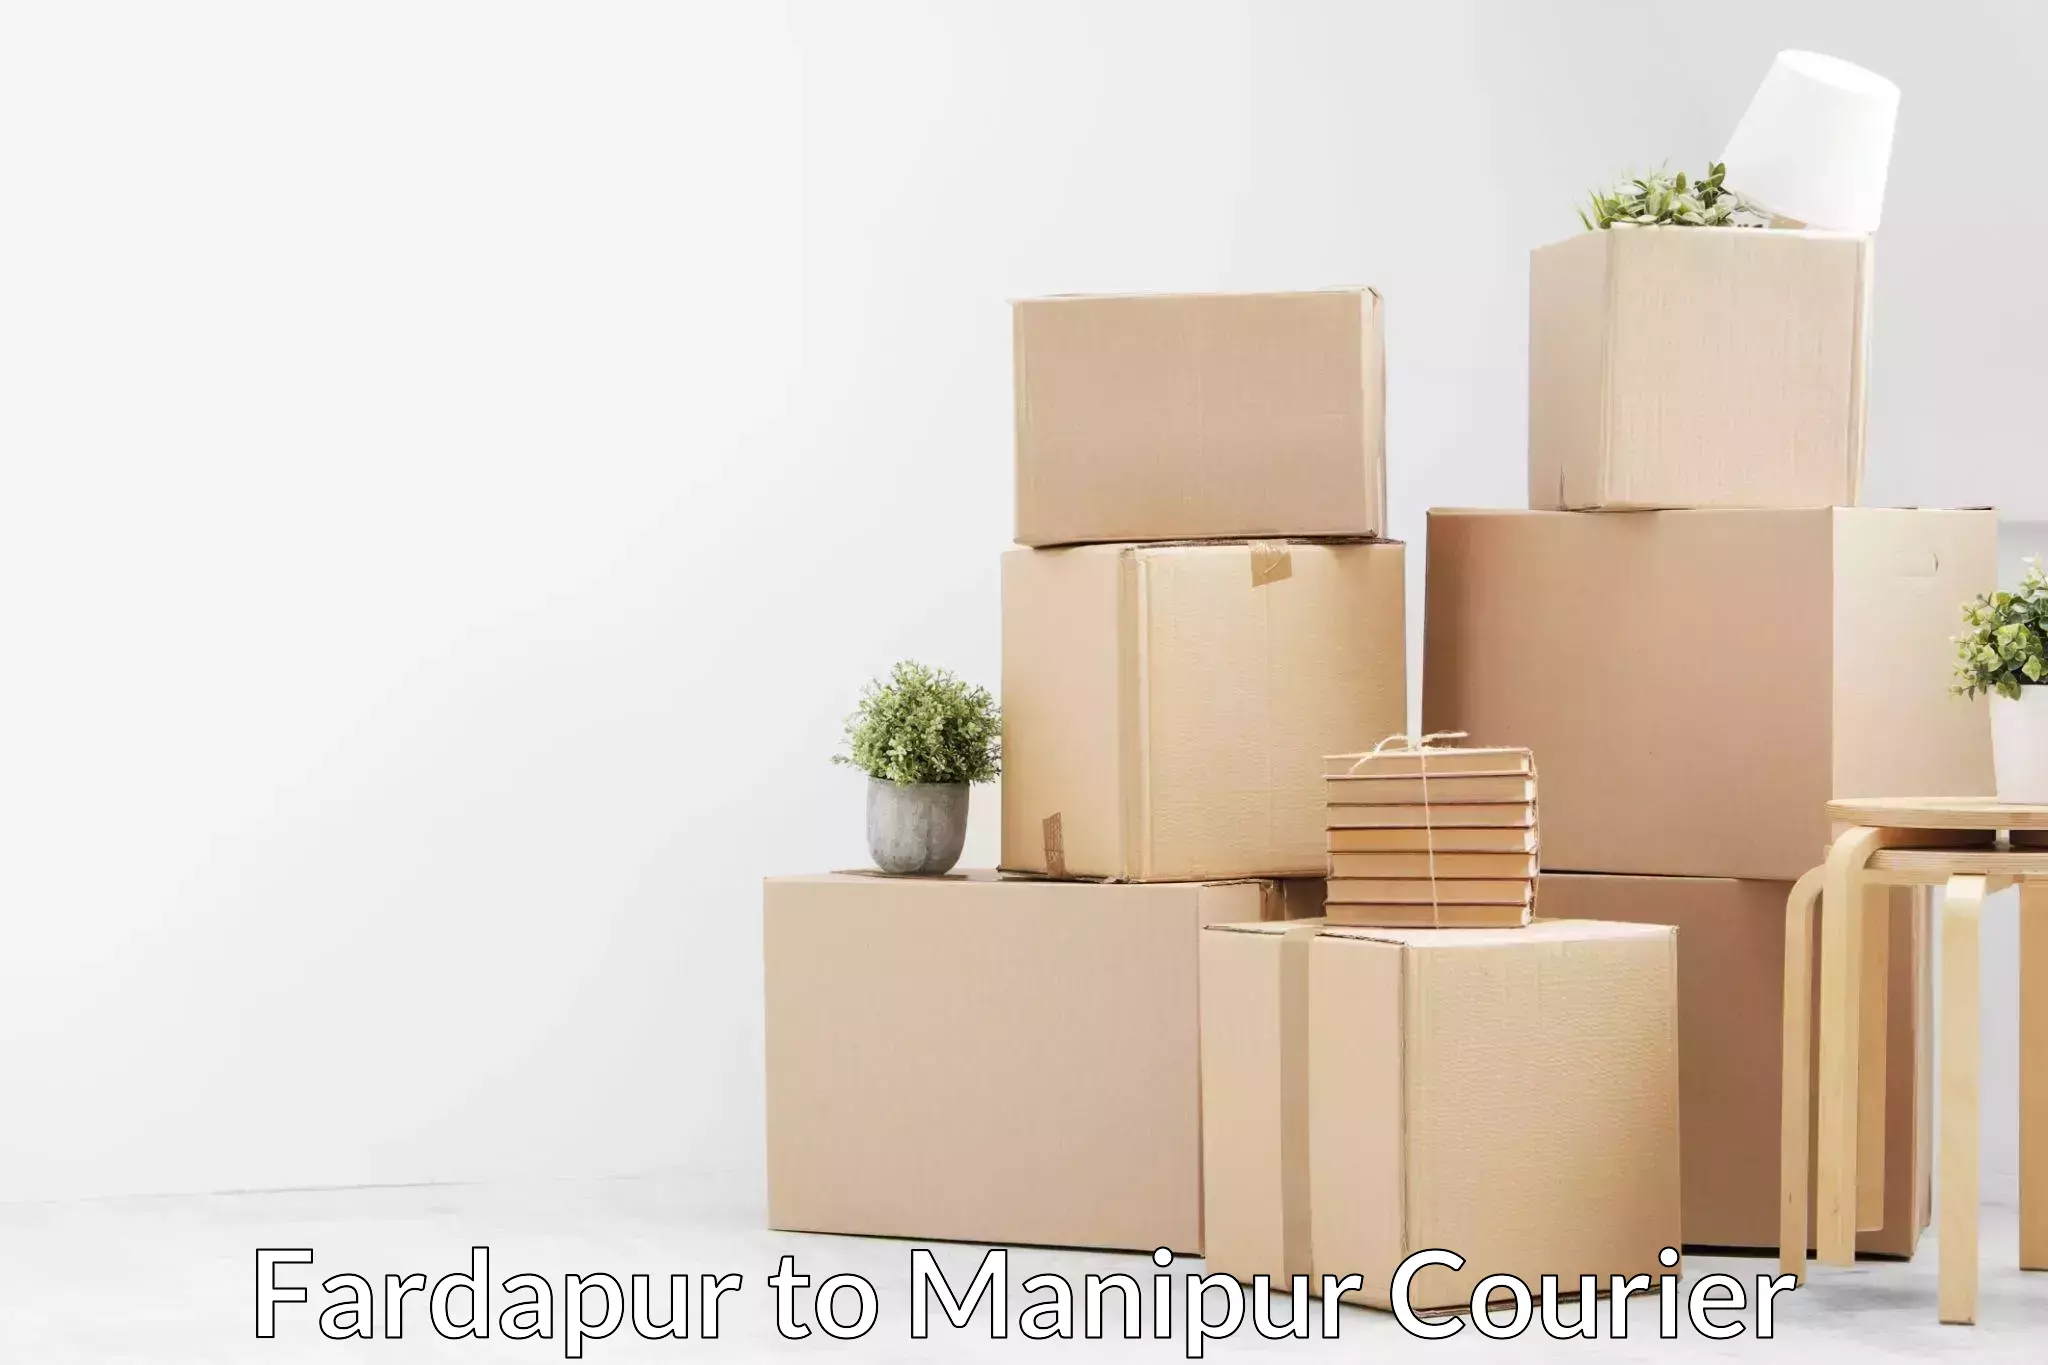 Furniture delivery service Fardapur to Imphal